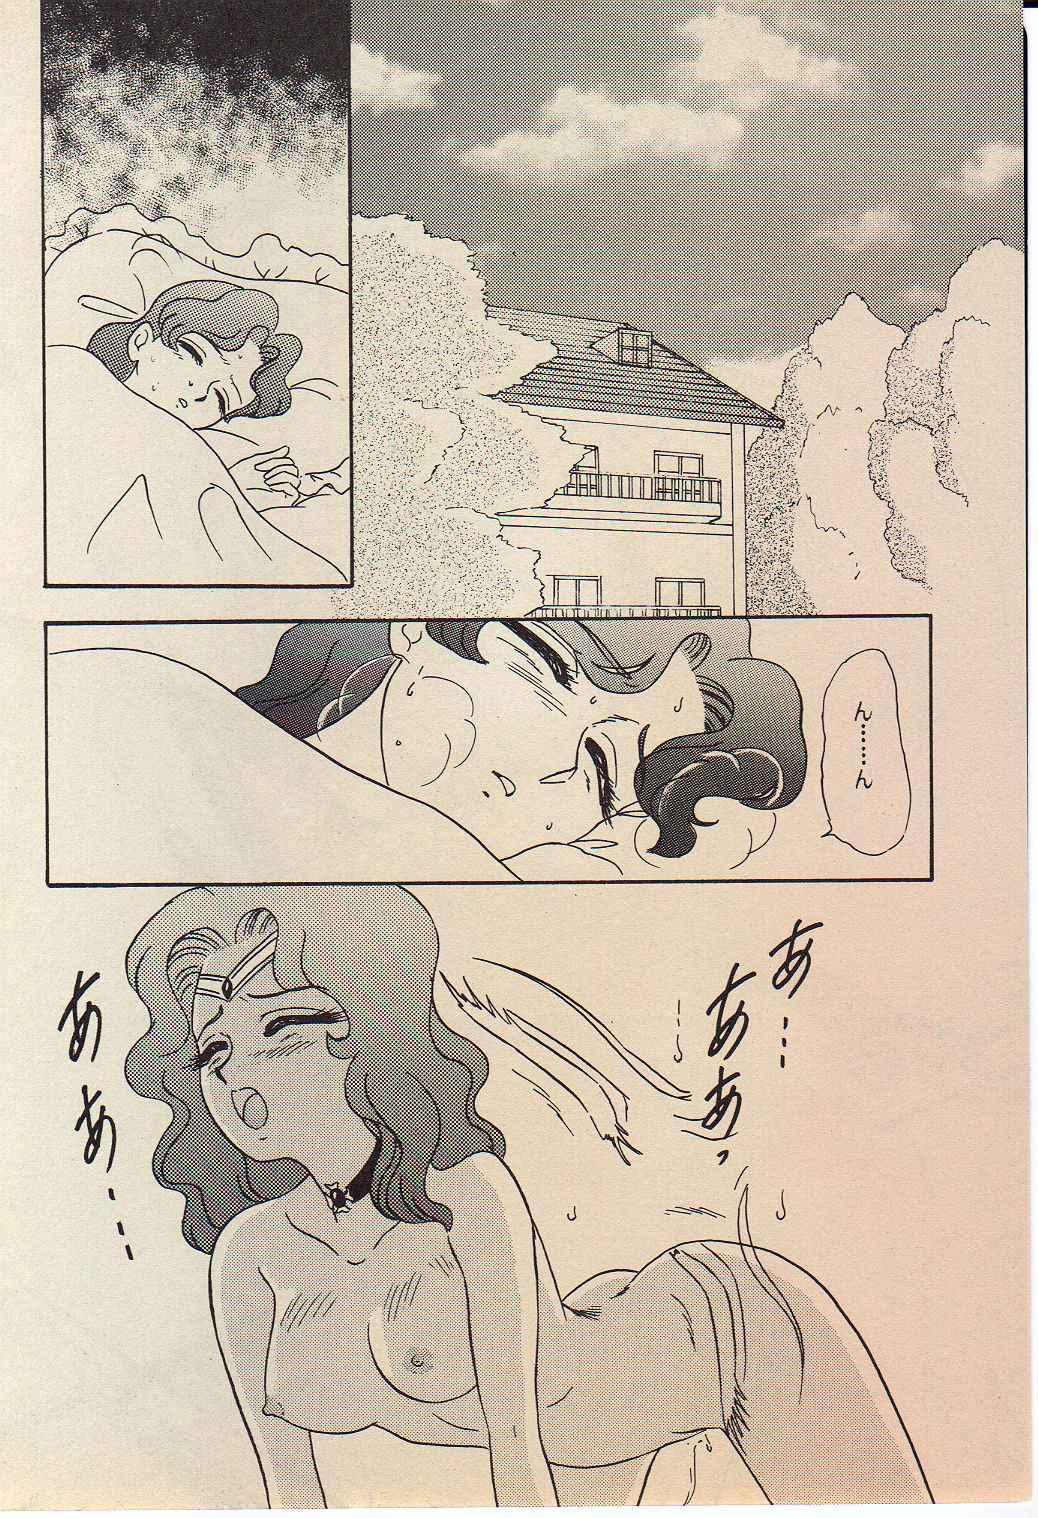 European Porn Lunch Box 11 - Twinkle Twinkle - Sailor moon Gay Medical - Page 5